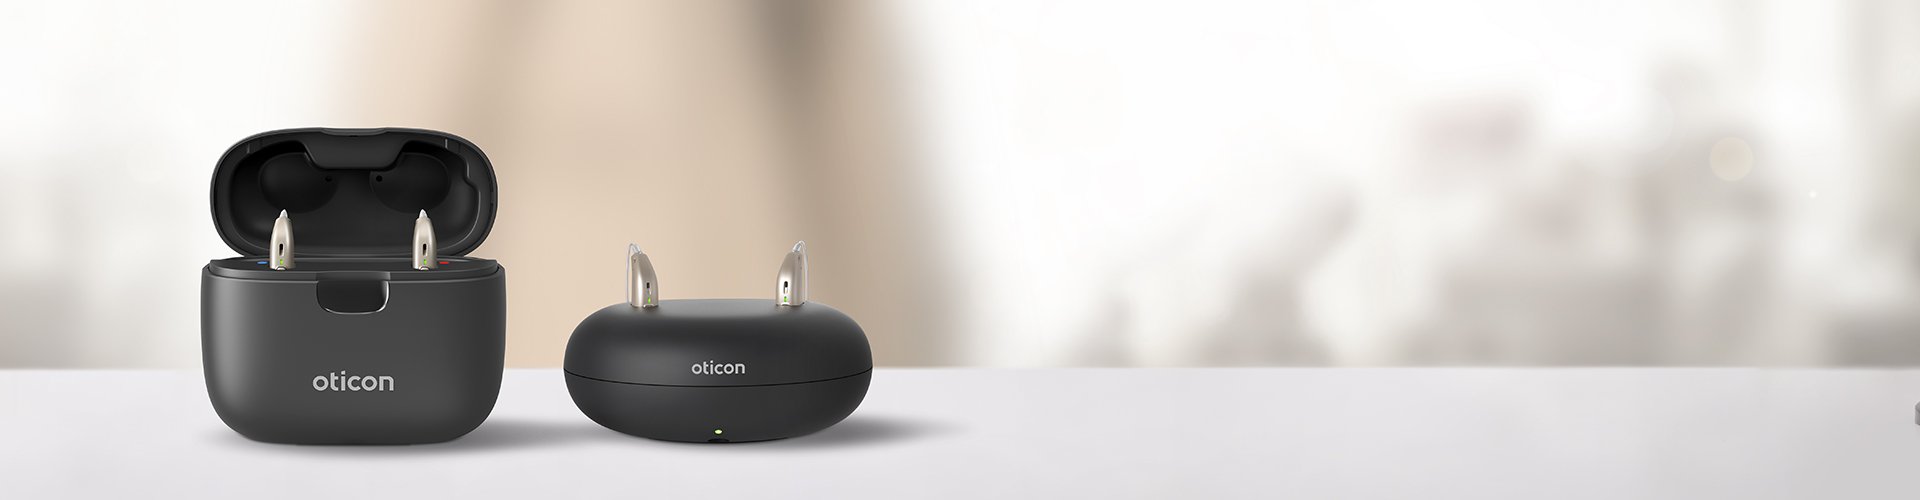 oticon_real_minirite_r_chargers_and_reception_bell_background_as_110446468-1920x500